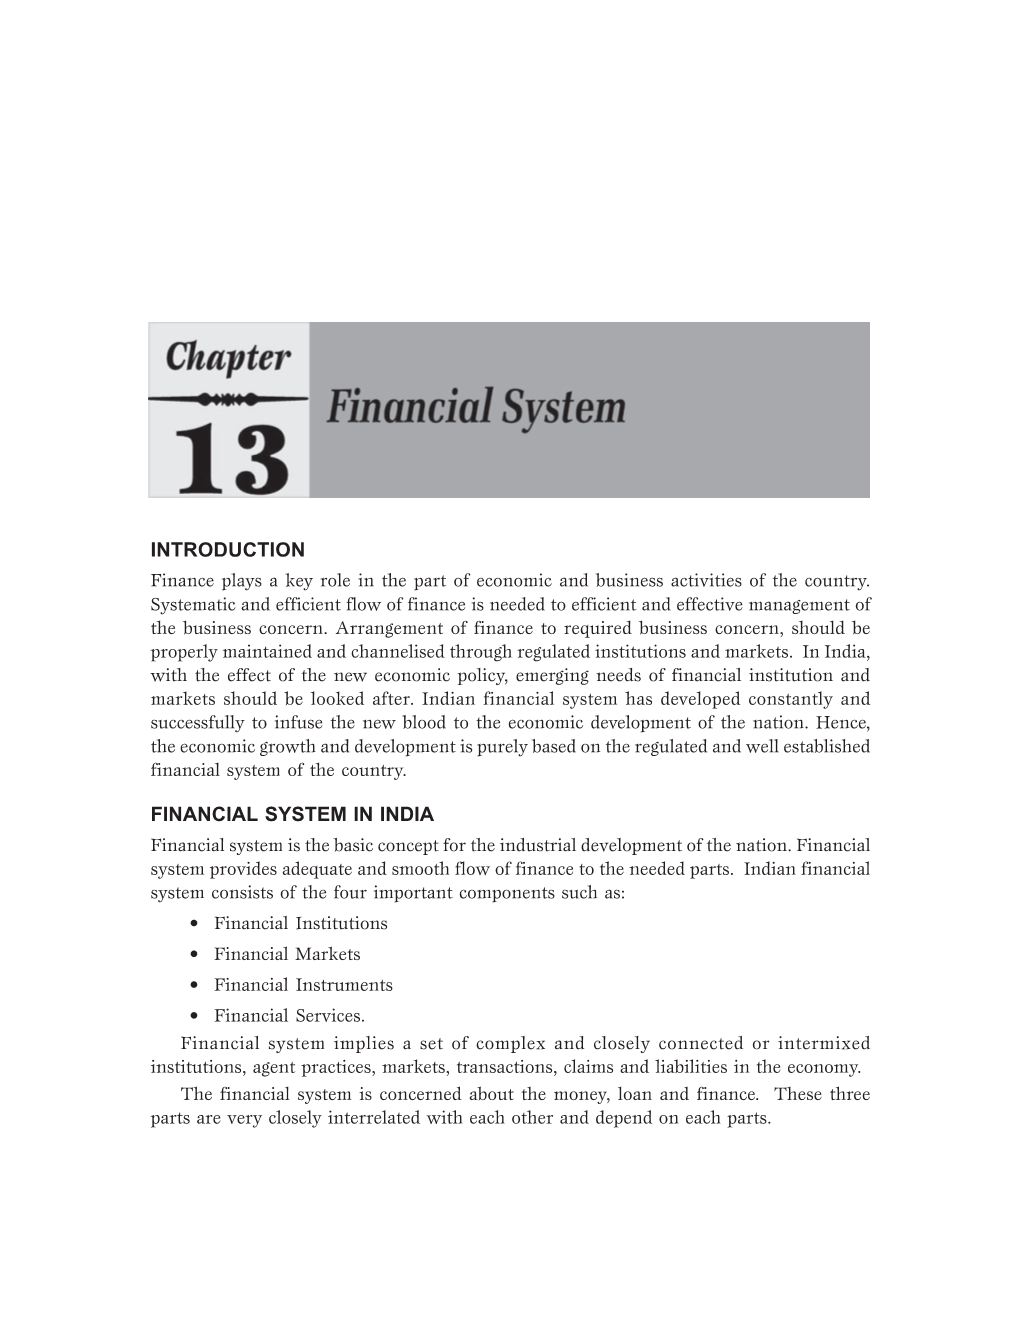 Introduction Financial System in India